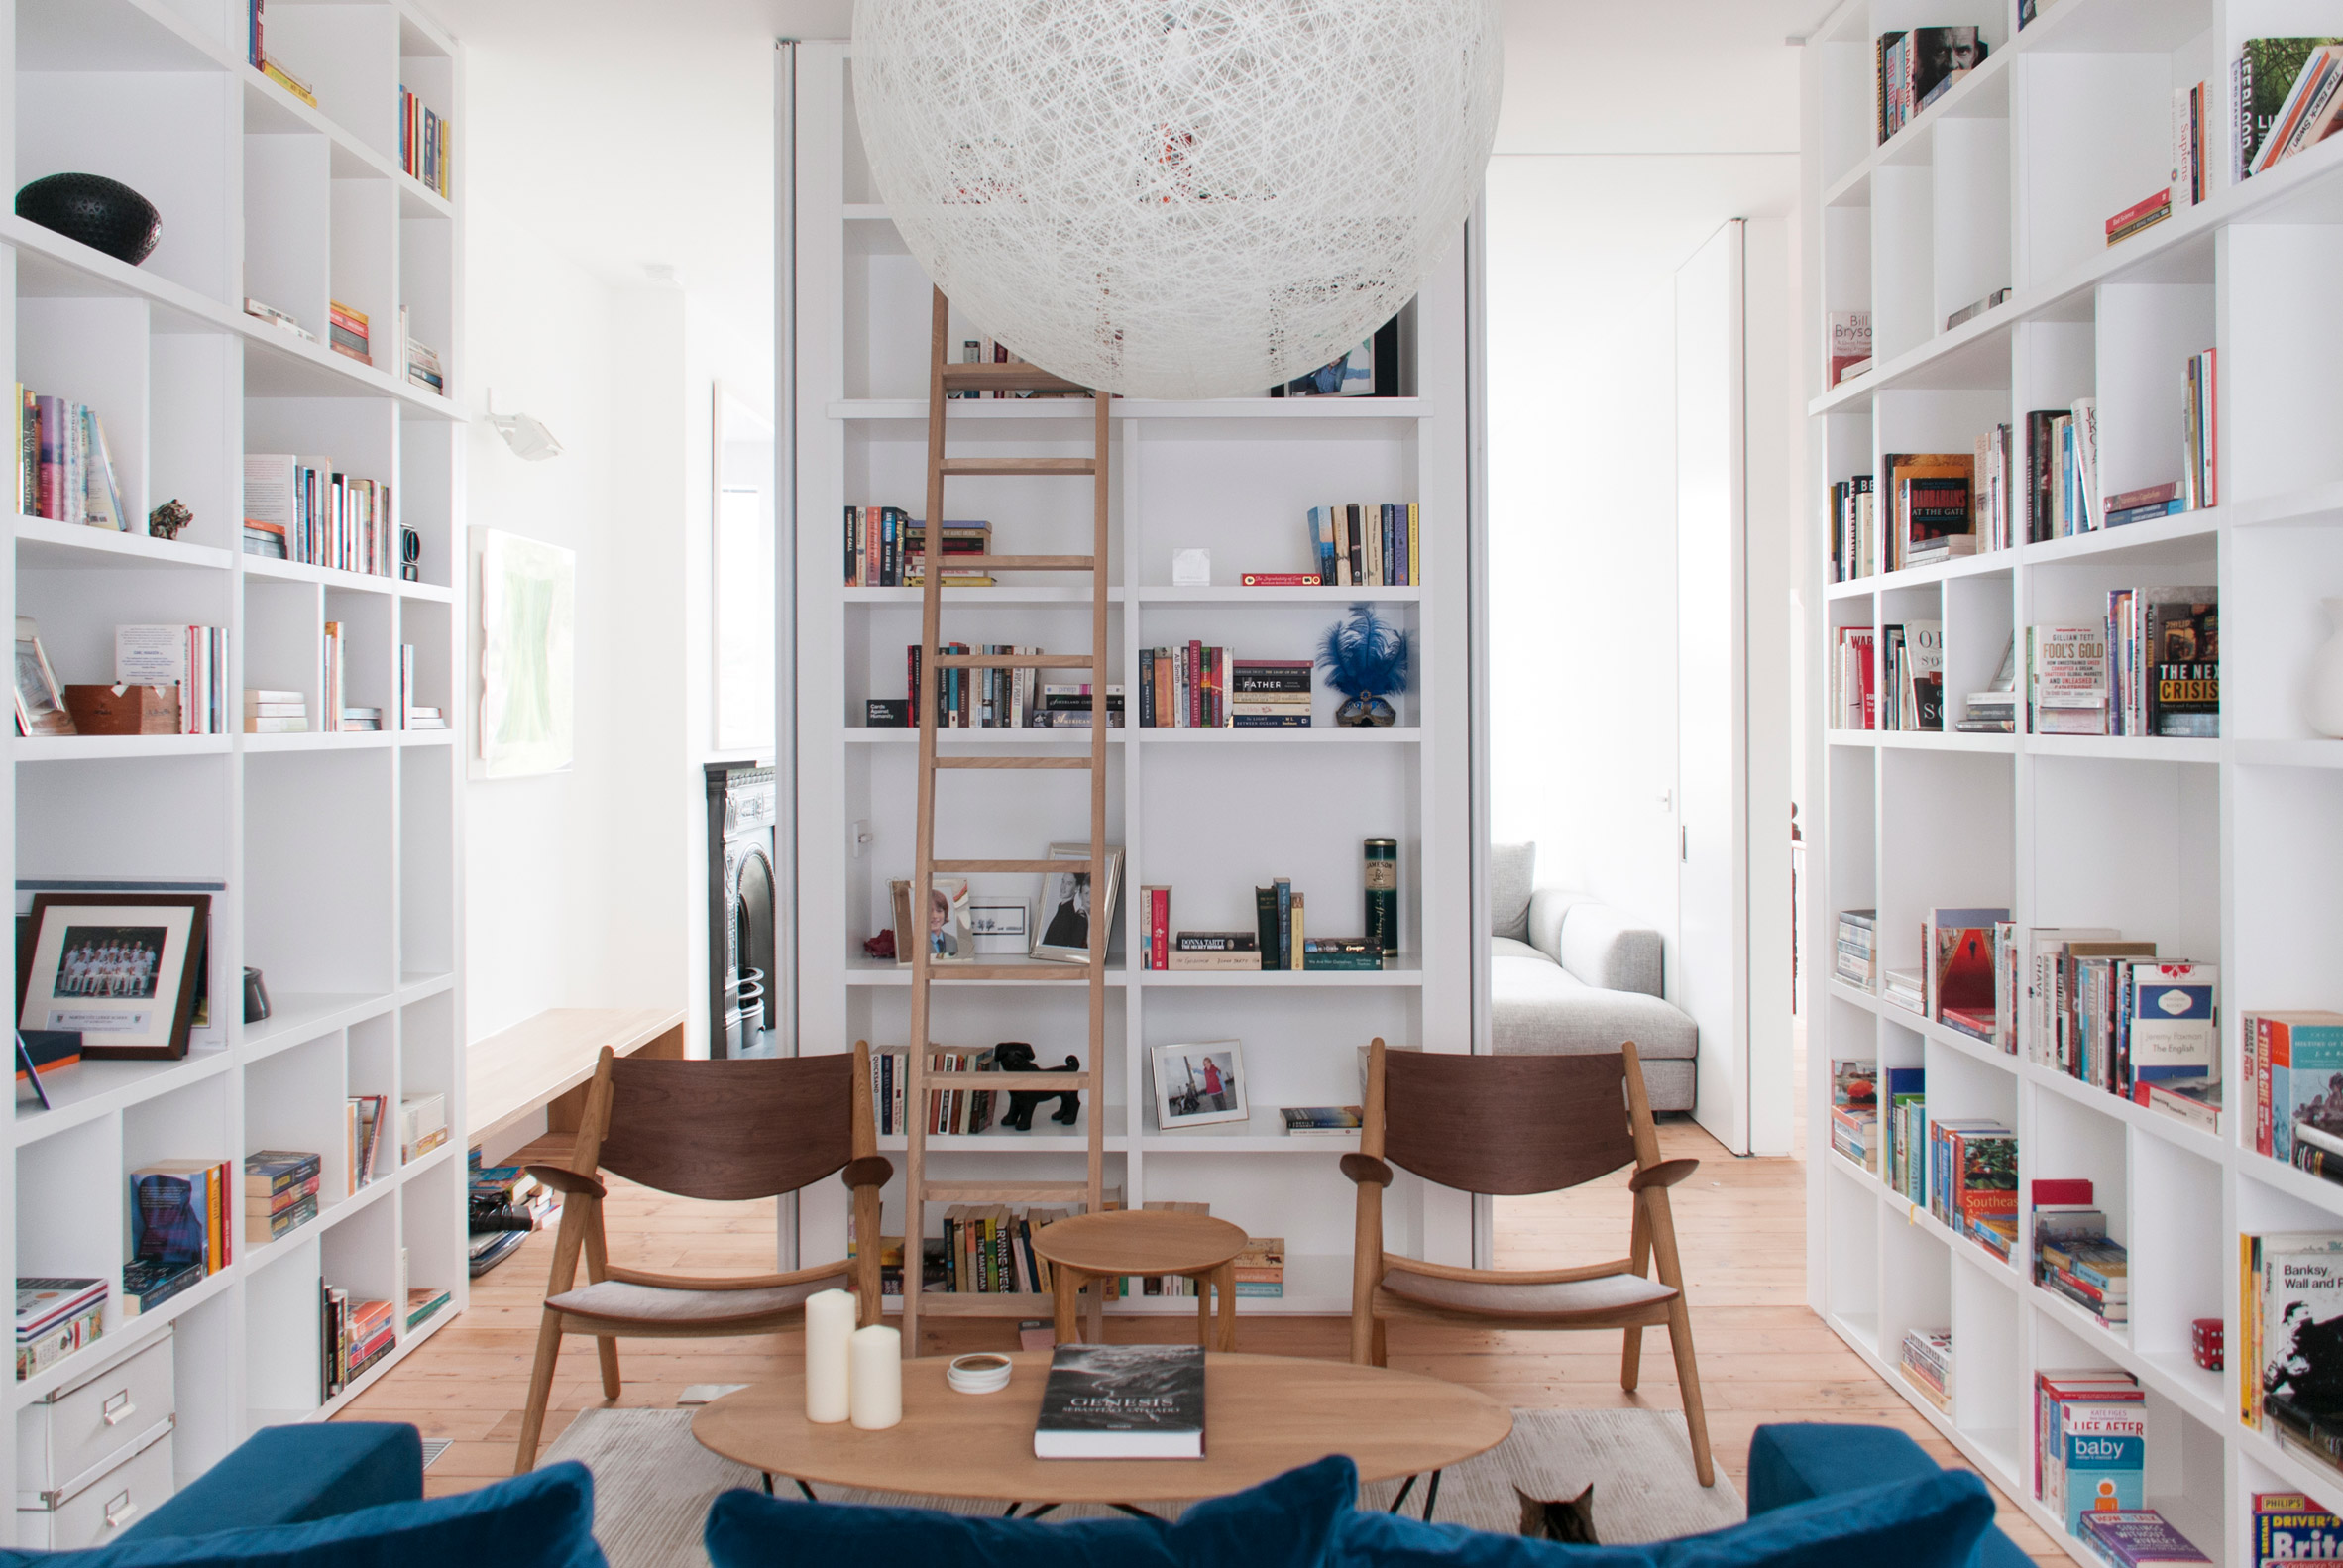 Shelving units and concealed doors compartmentalise refurbished London home